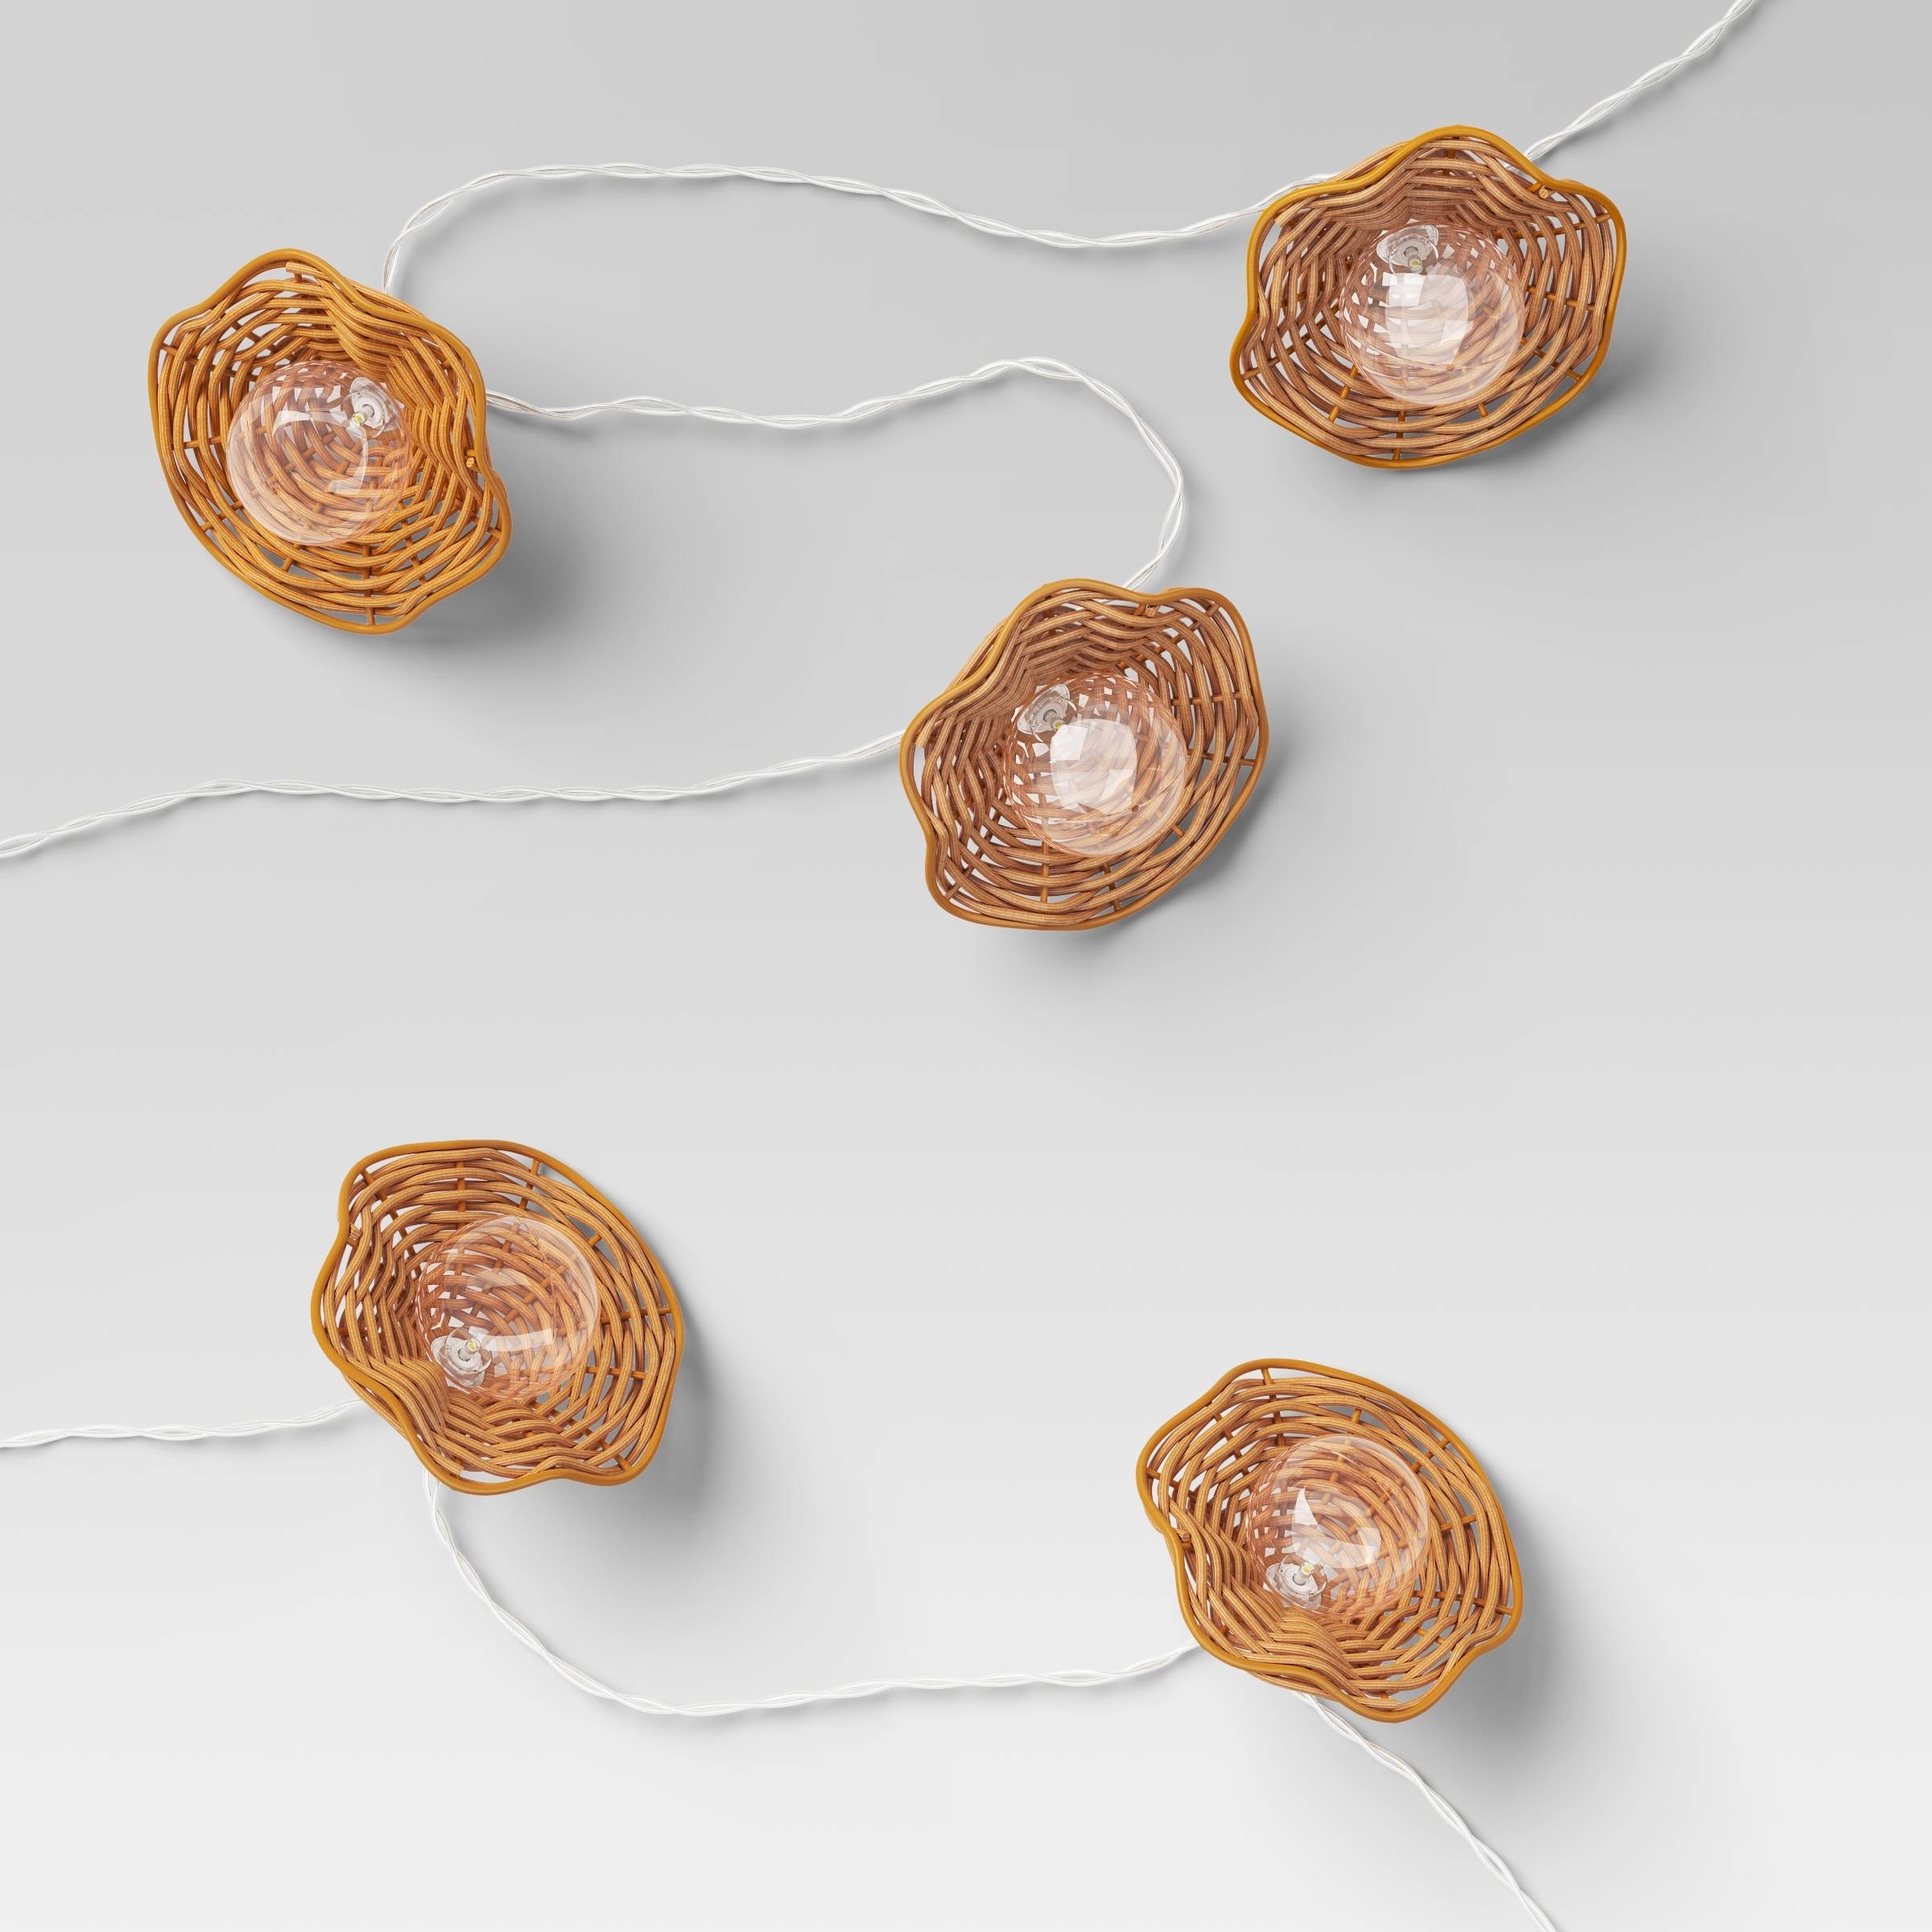 String lights with four wicker-covered bulbs on a plain background